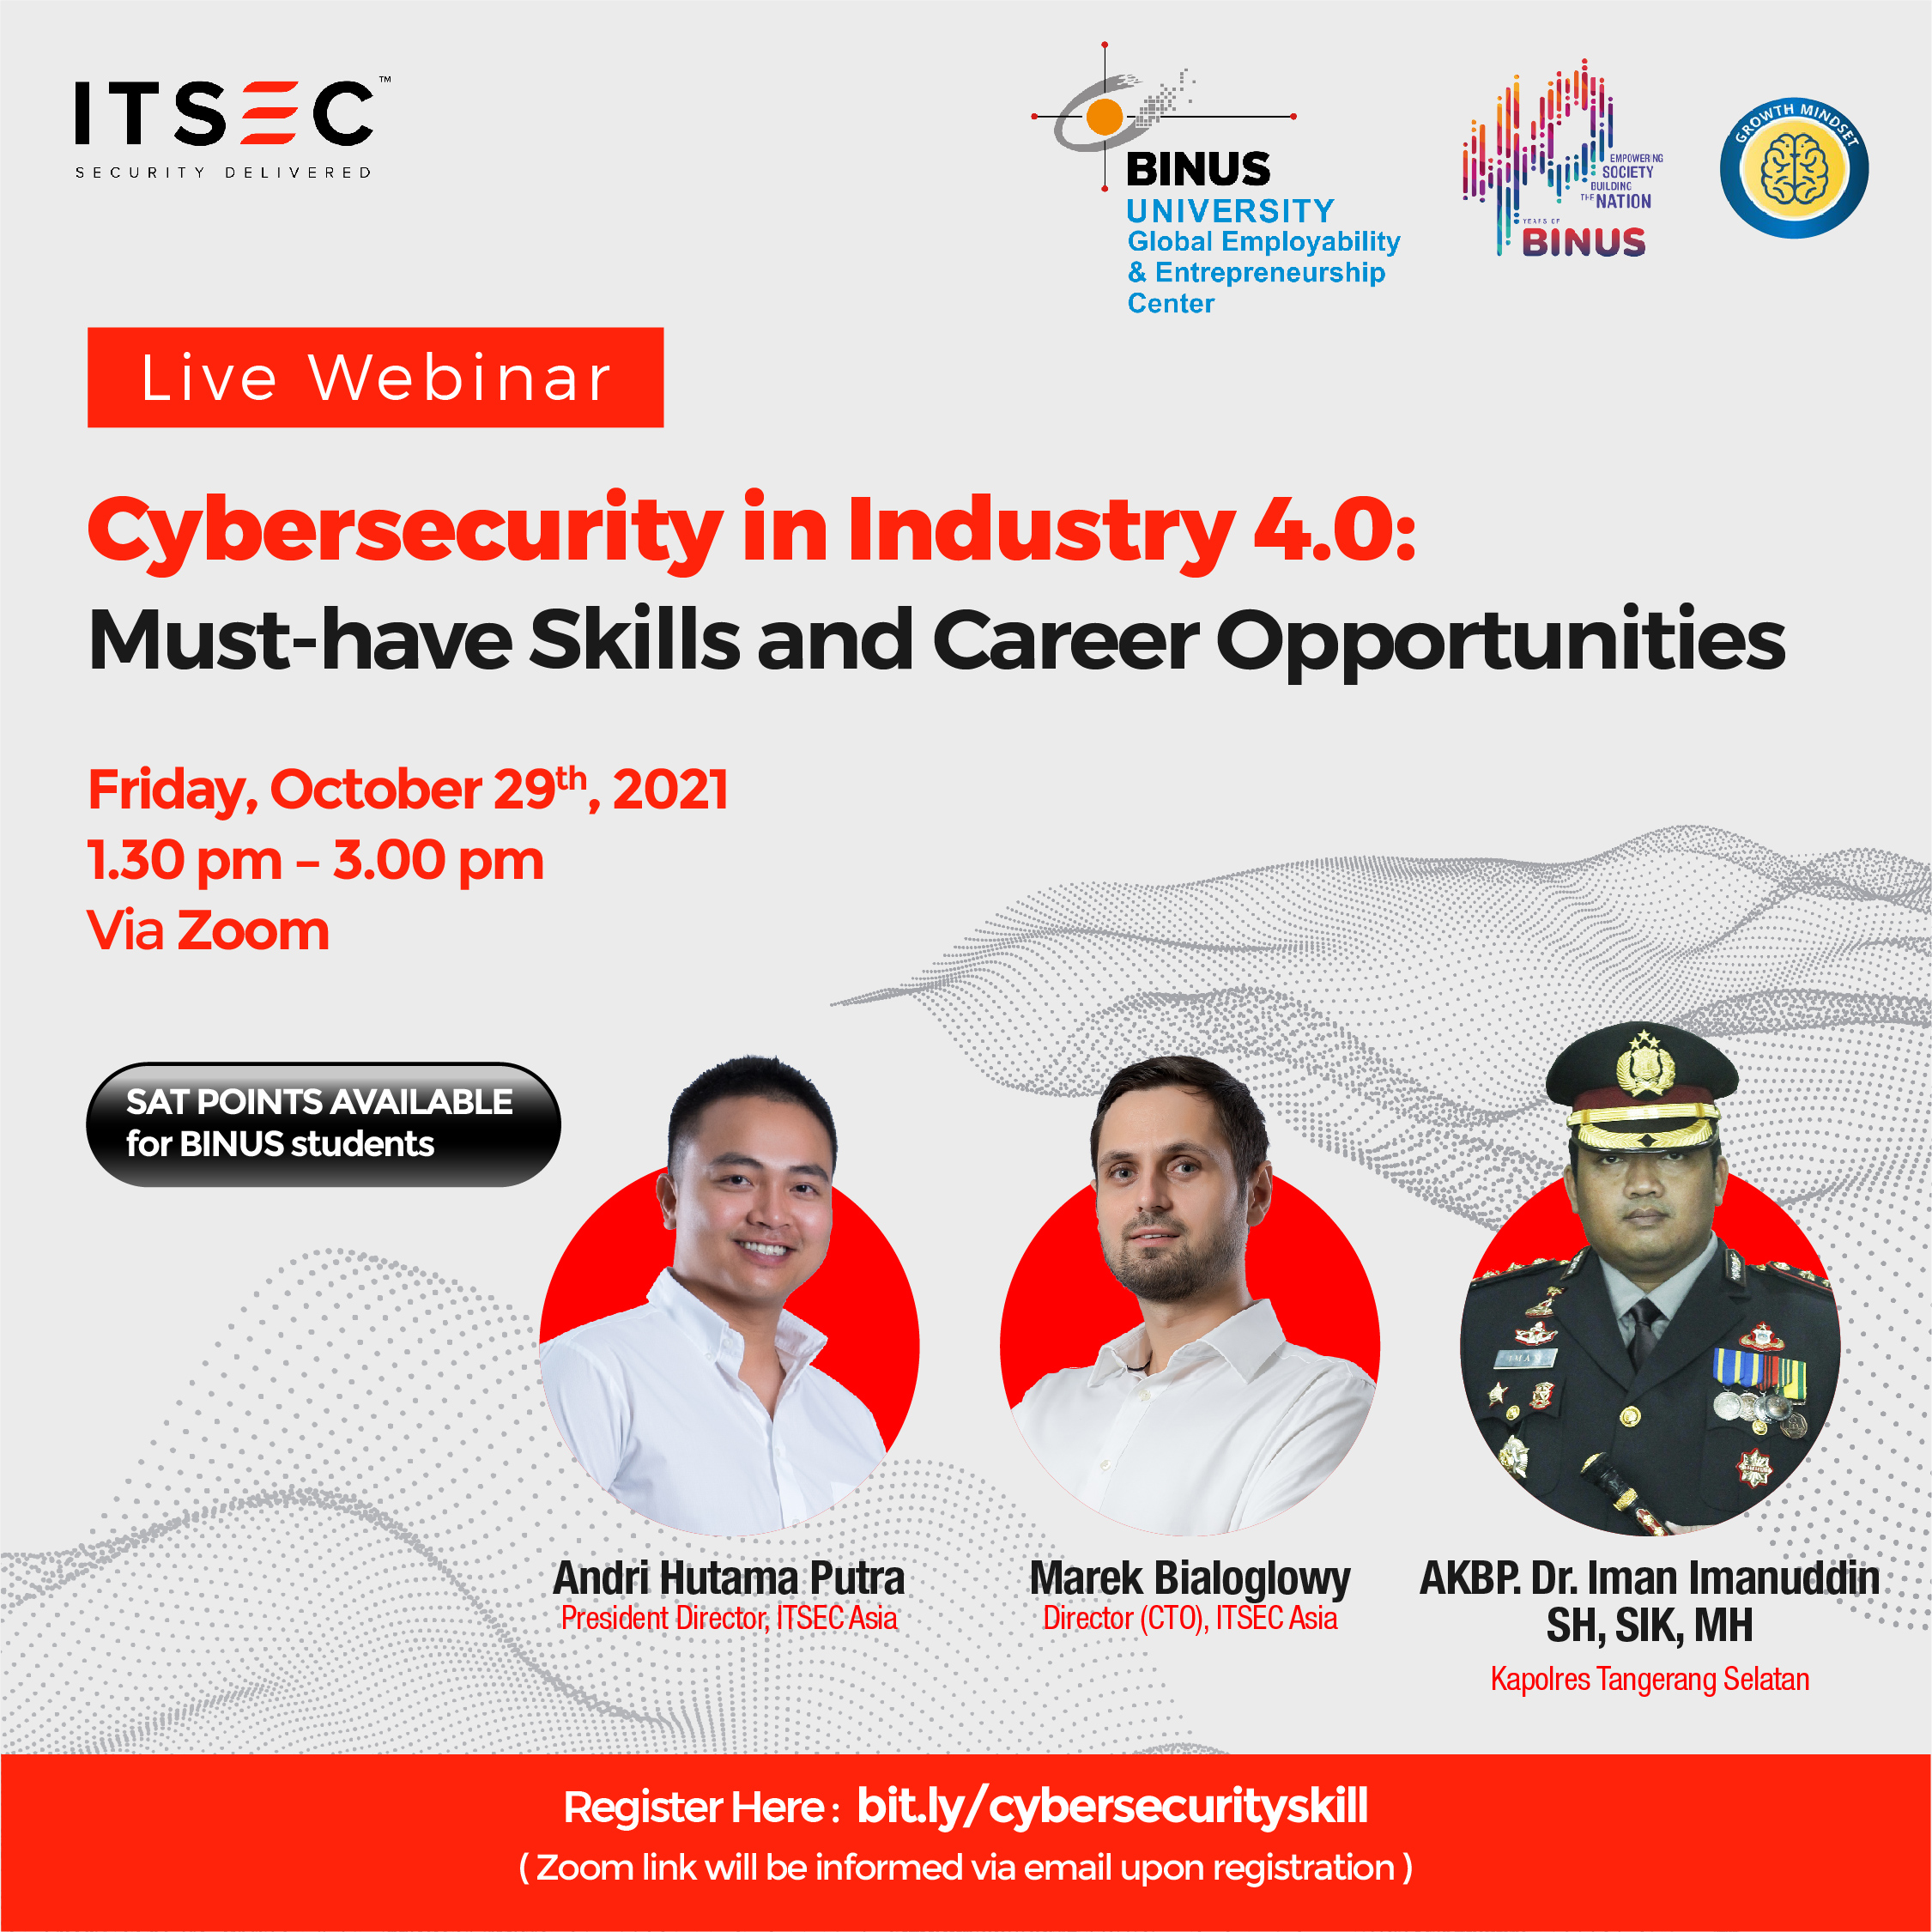 Cybersecurity in Industry 4.0: Must-have Skills and Career Opportunities